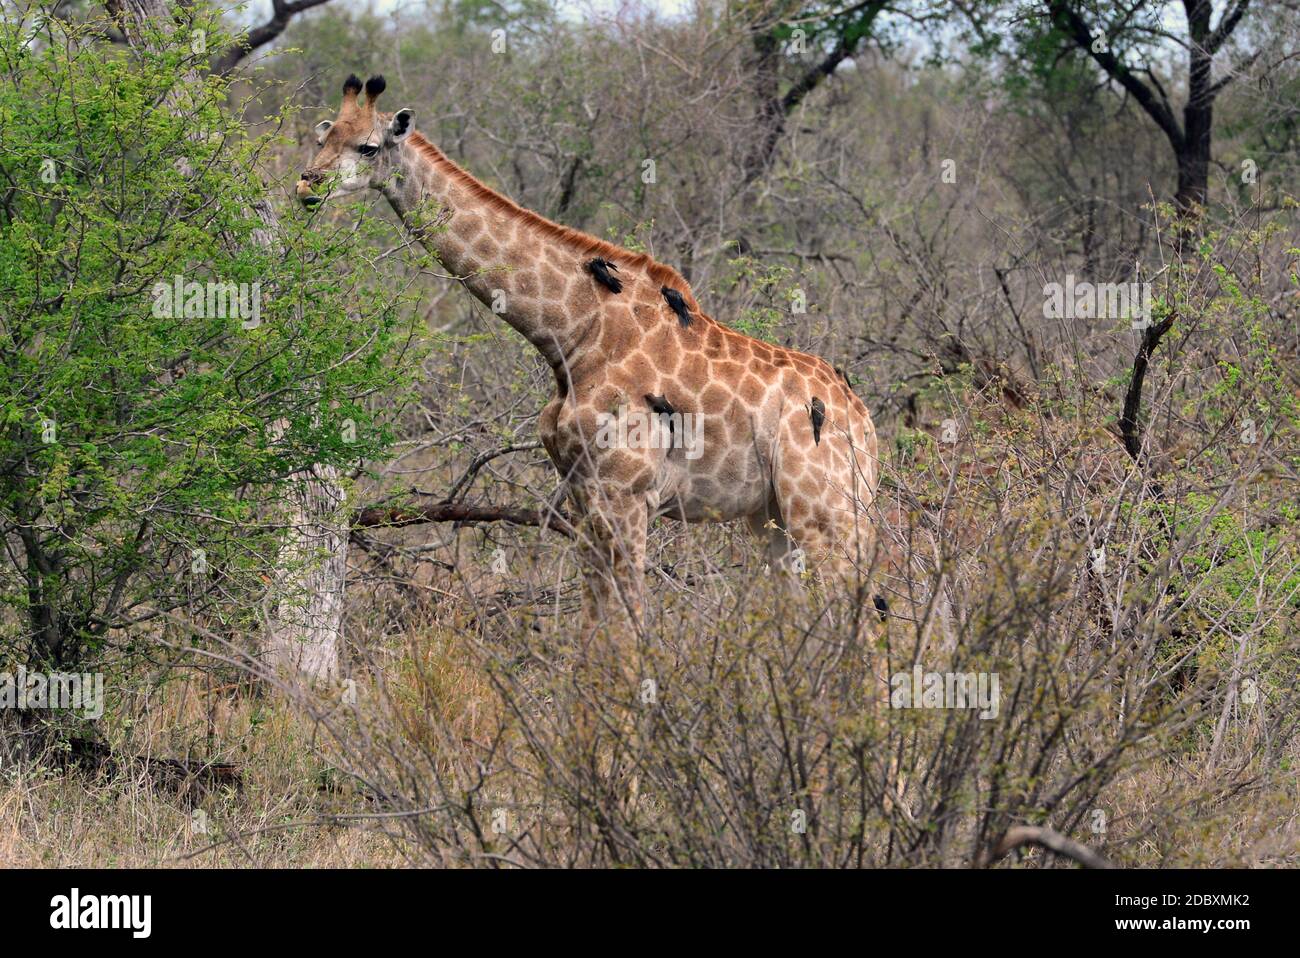 Giraffe with maggot chopper in the Kruger National Park in South Africa Stock Photo